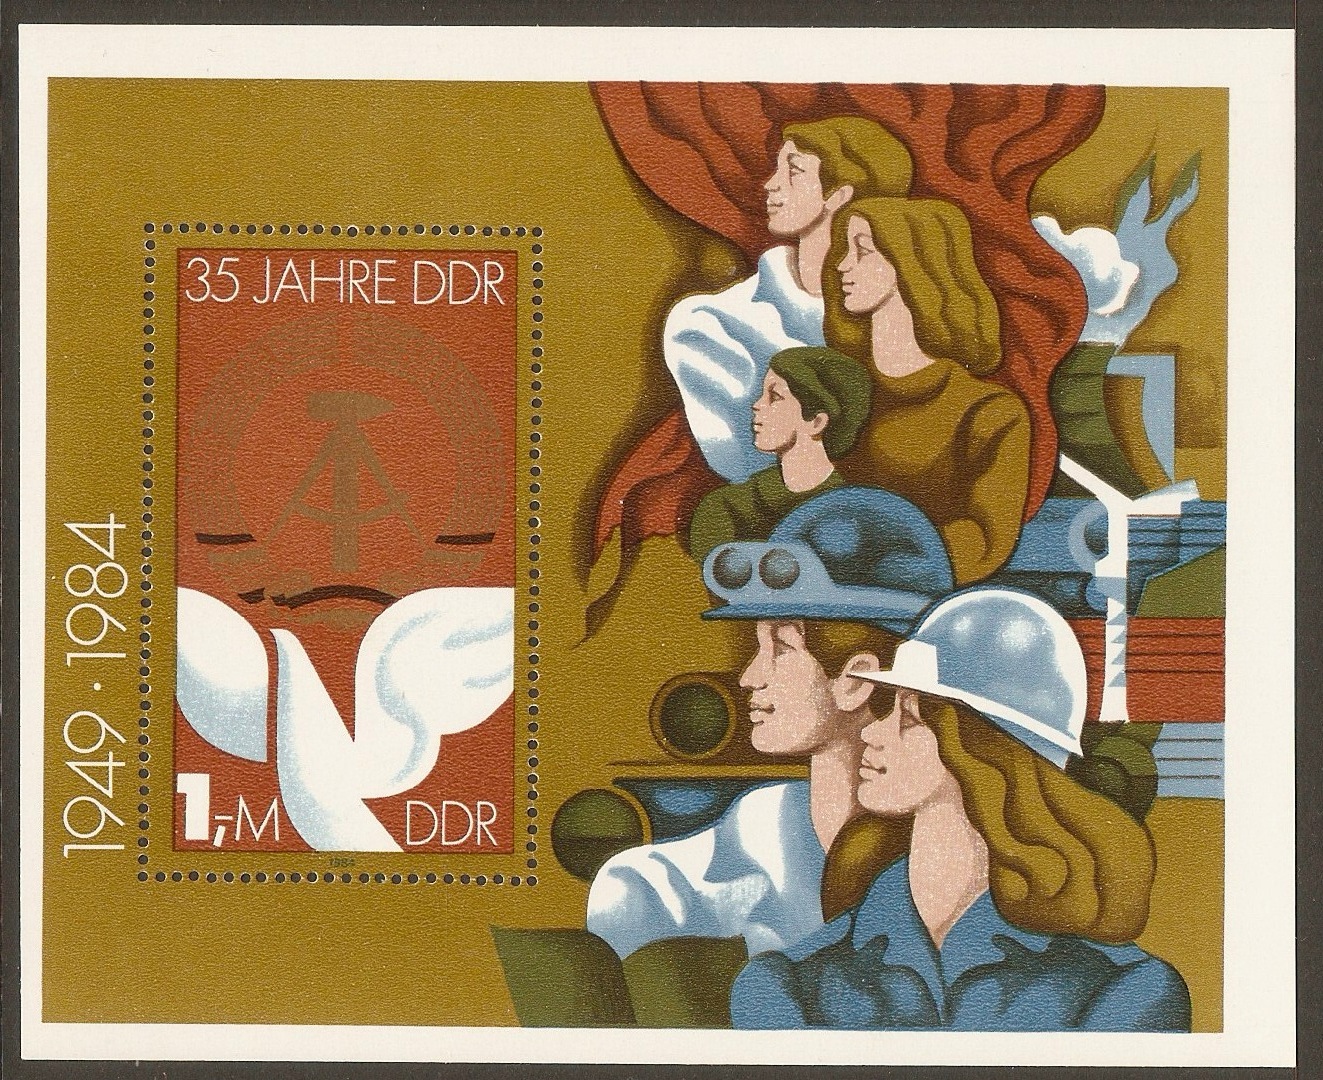 East Germany 1984 DDR Anniversary sheet. SGMSE2613.